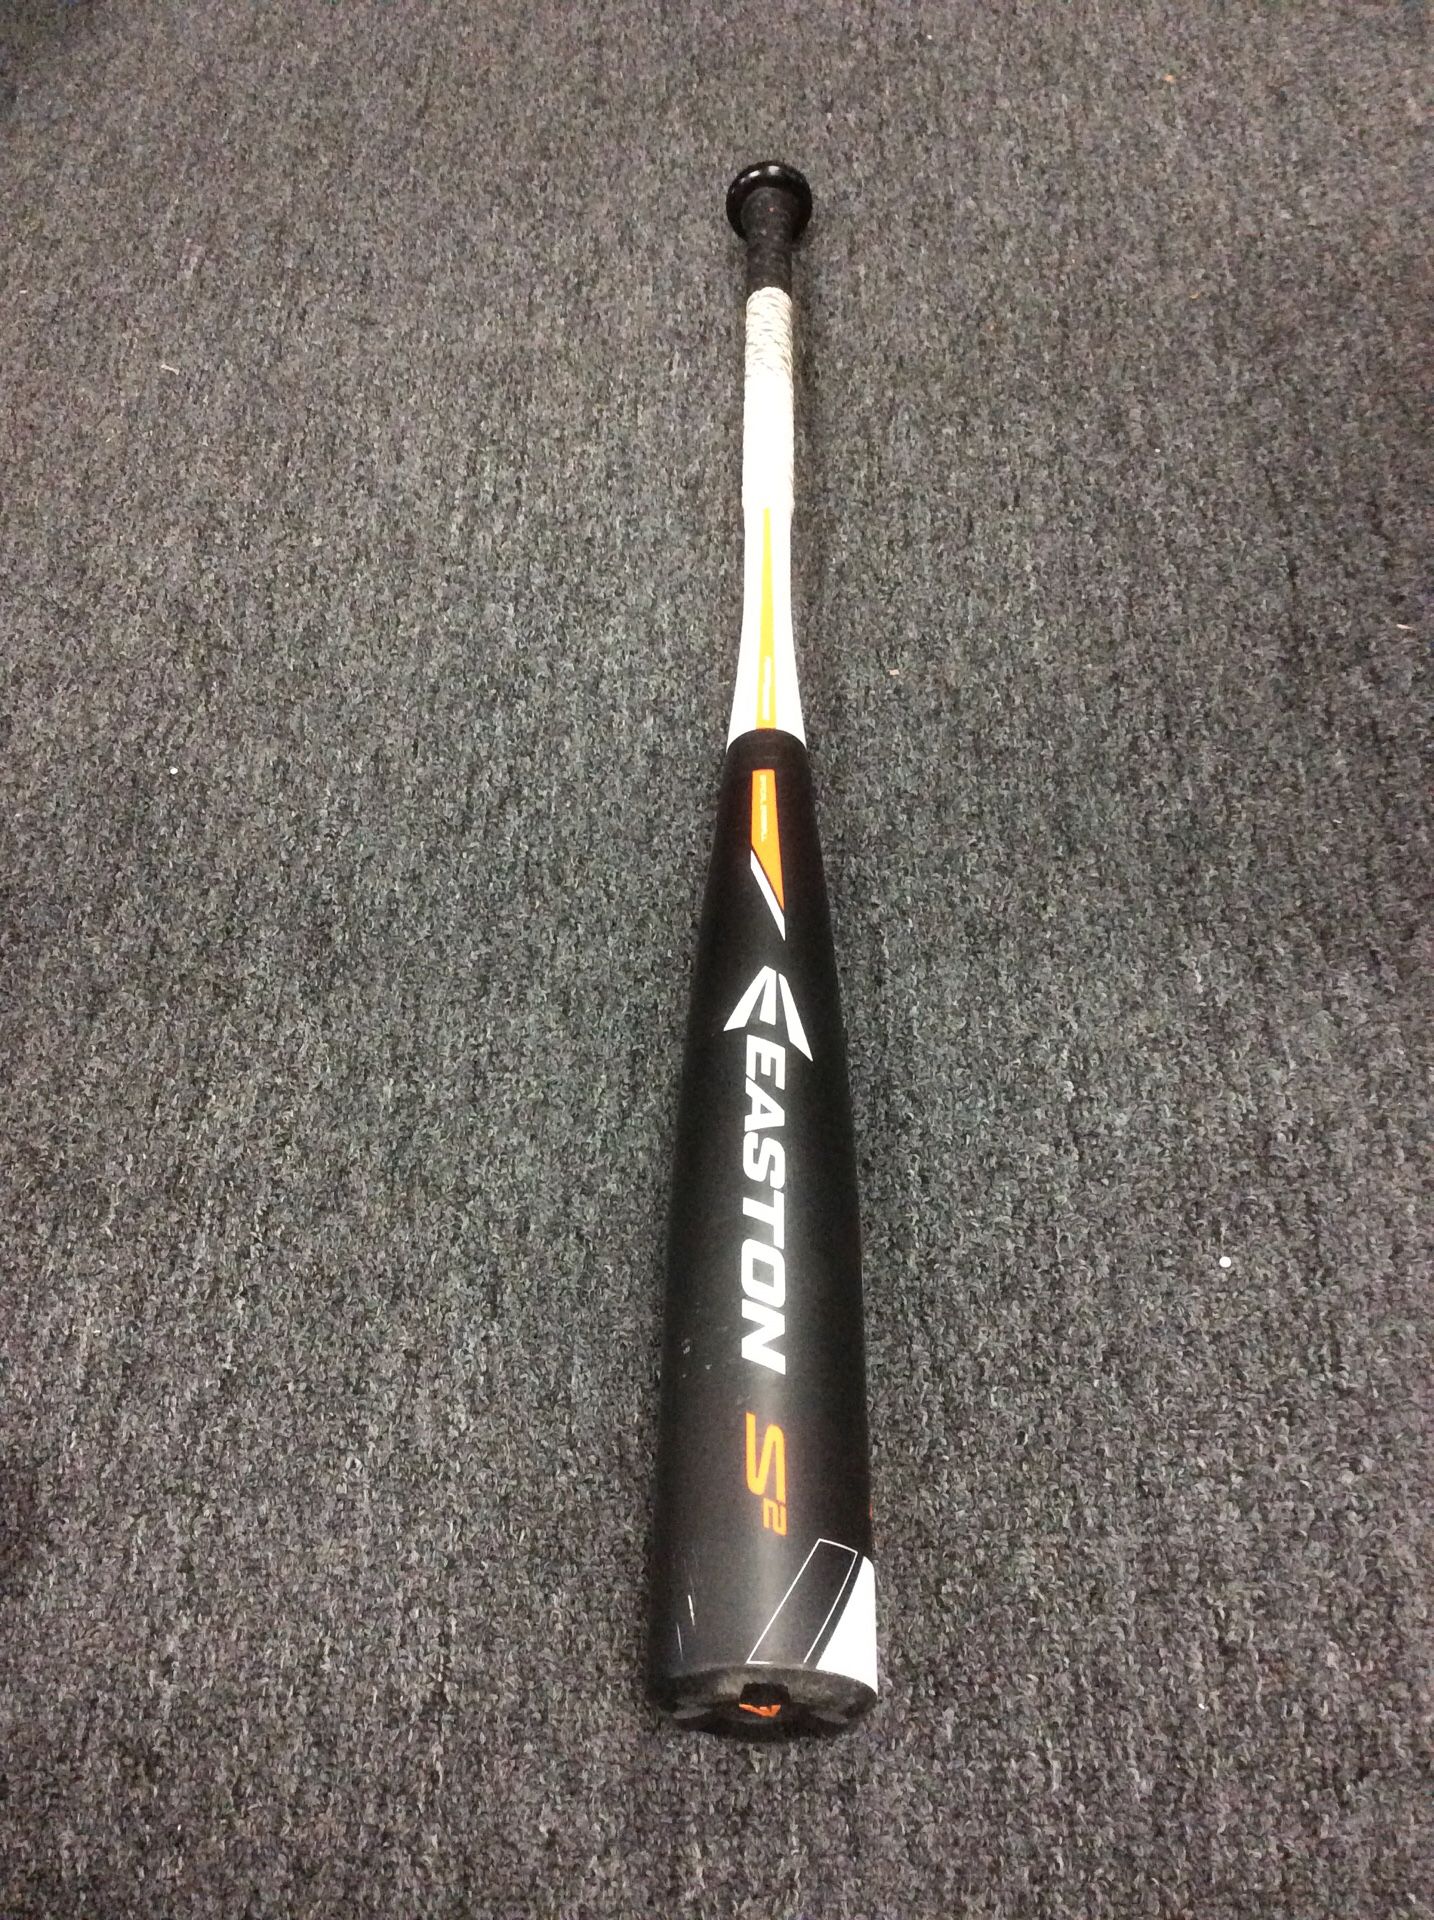 Easton S2 USSSA Senior League Baseball Bat 31”/ 21oz (-10) - Excellent Condition- Pick up only - Price Firm